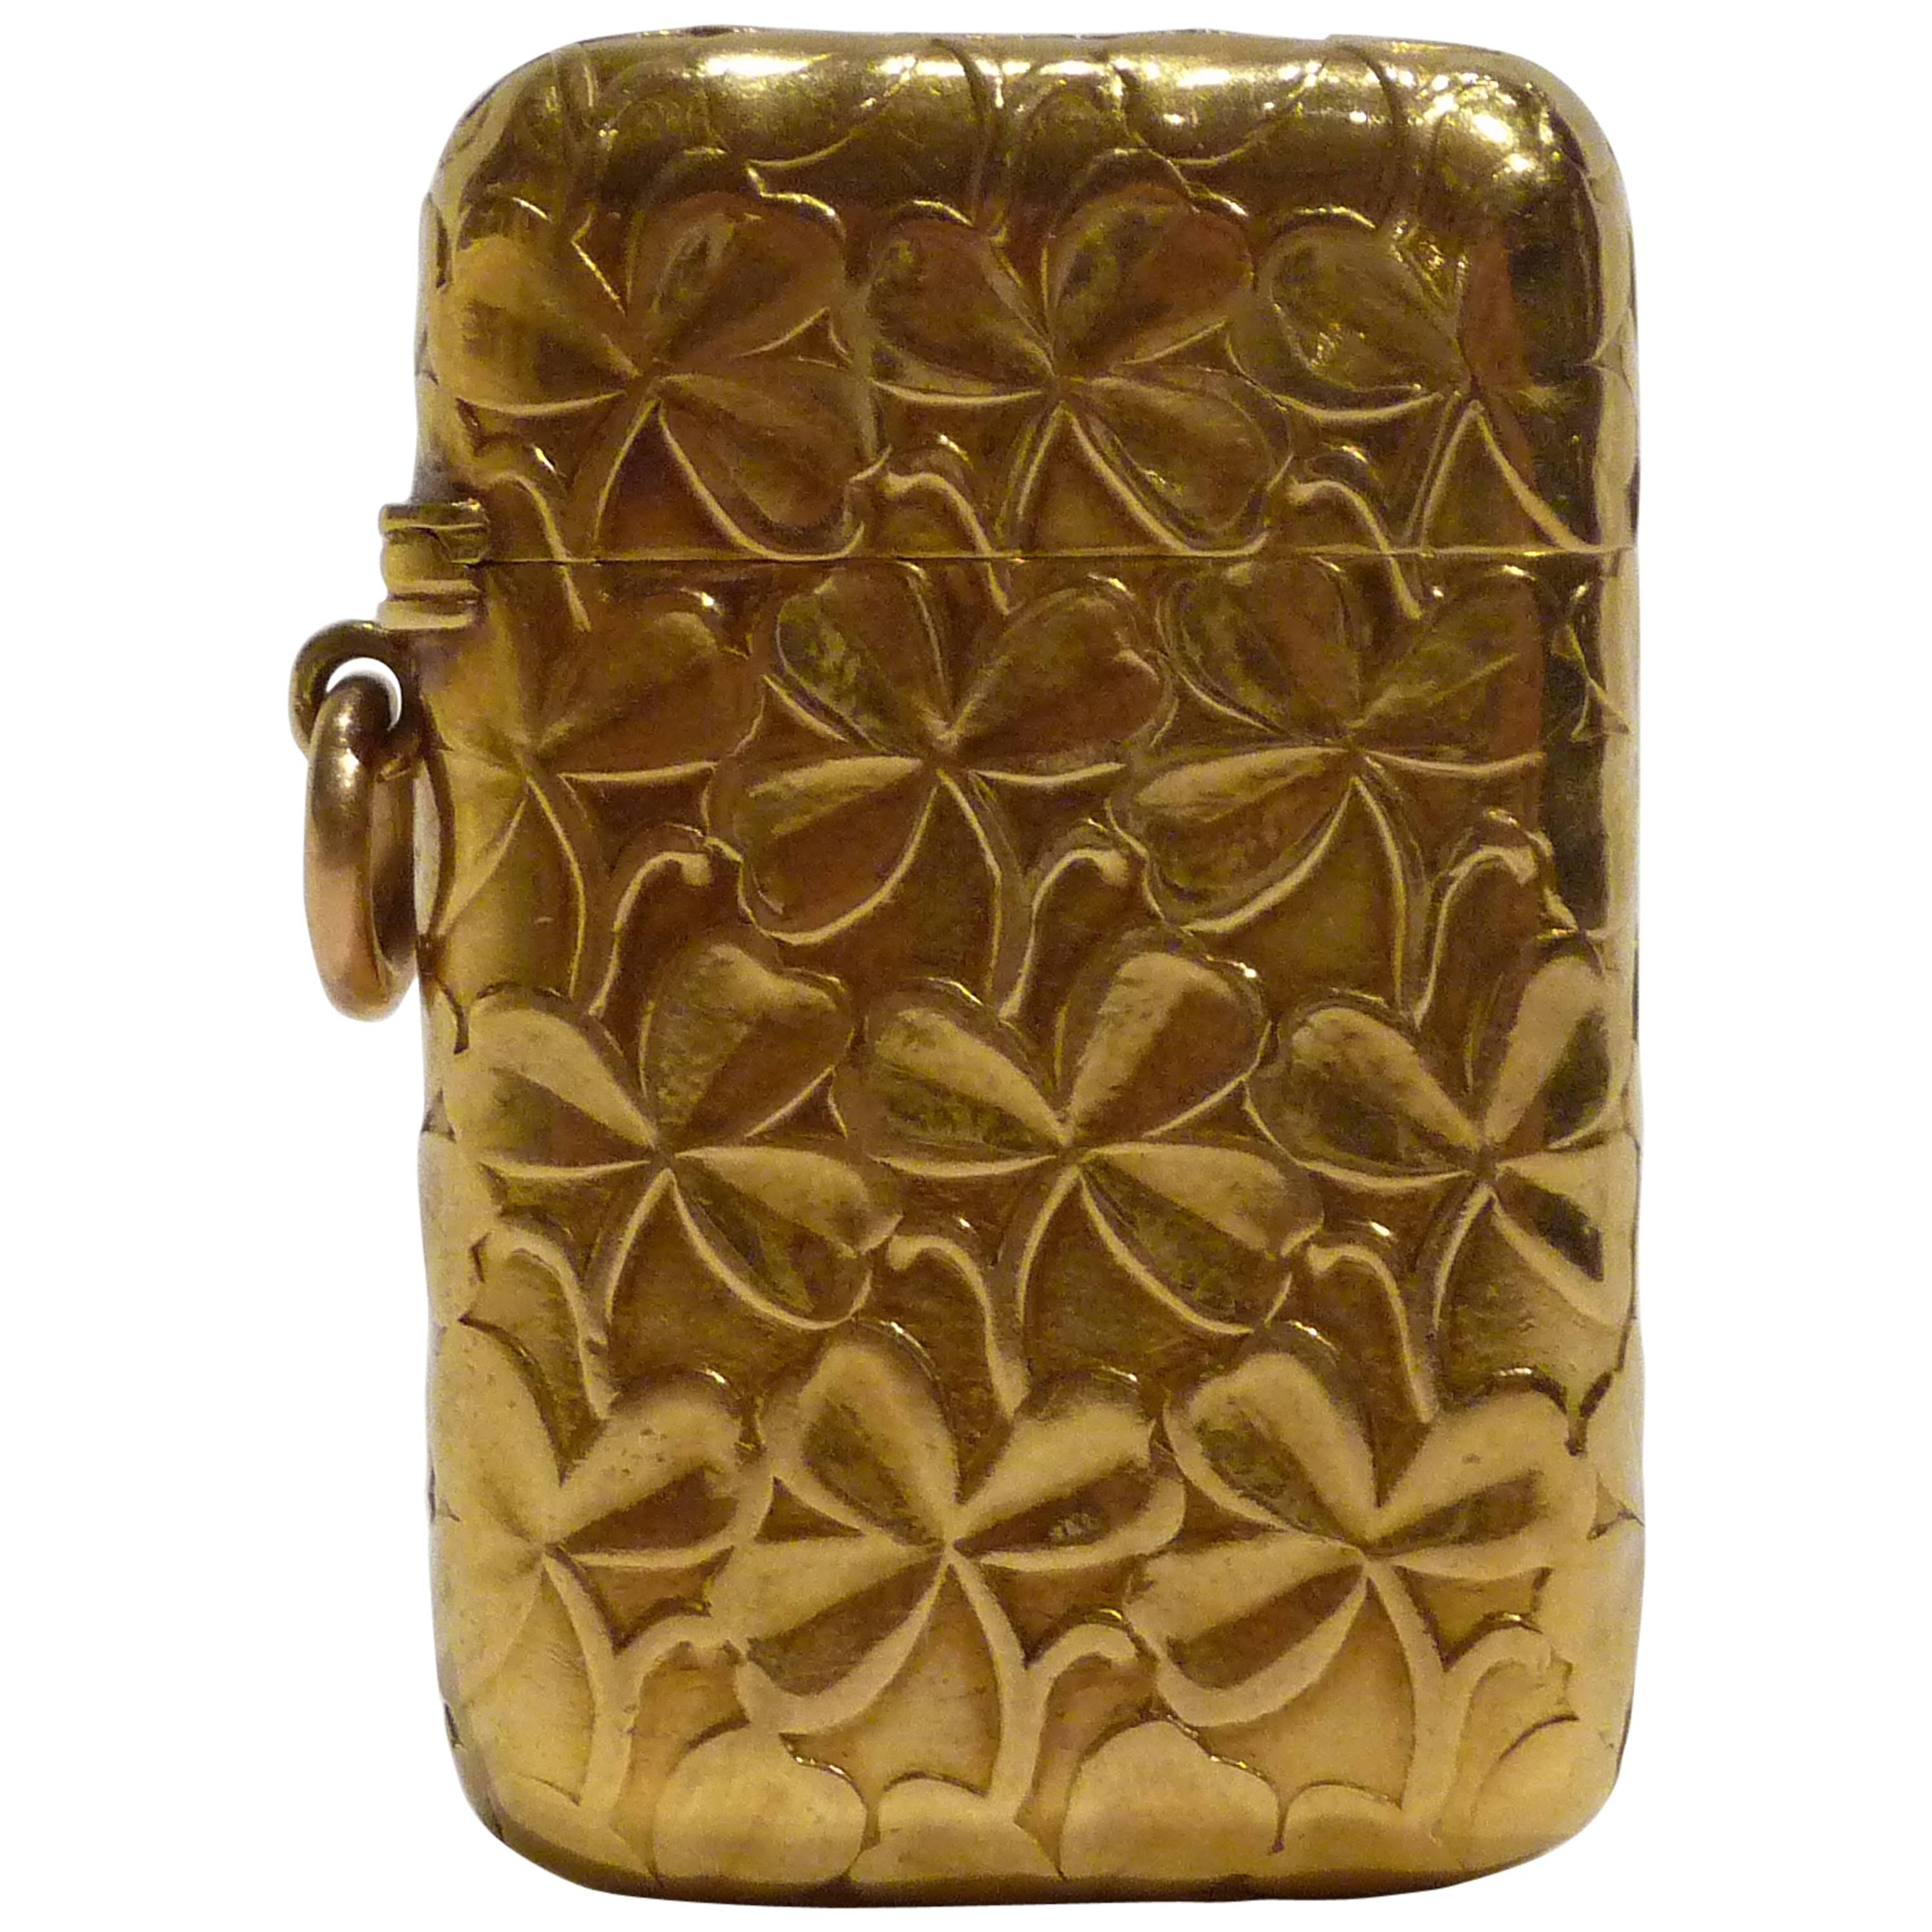 Paul Frey, a Gold Match Box Holder Decorated with Clovers For Sale